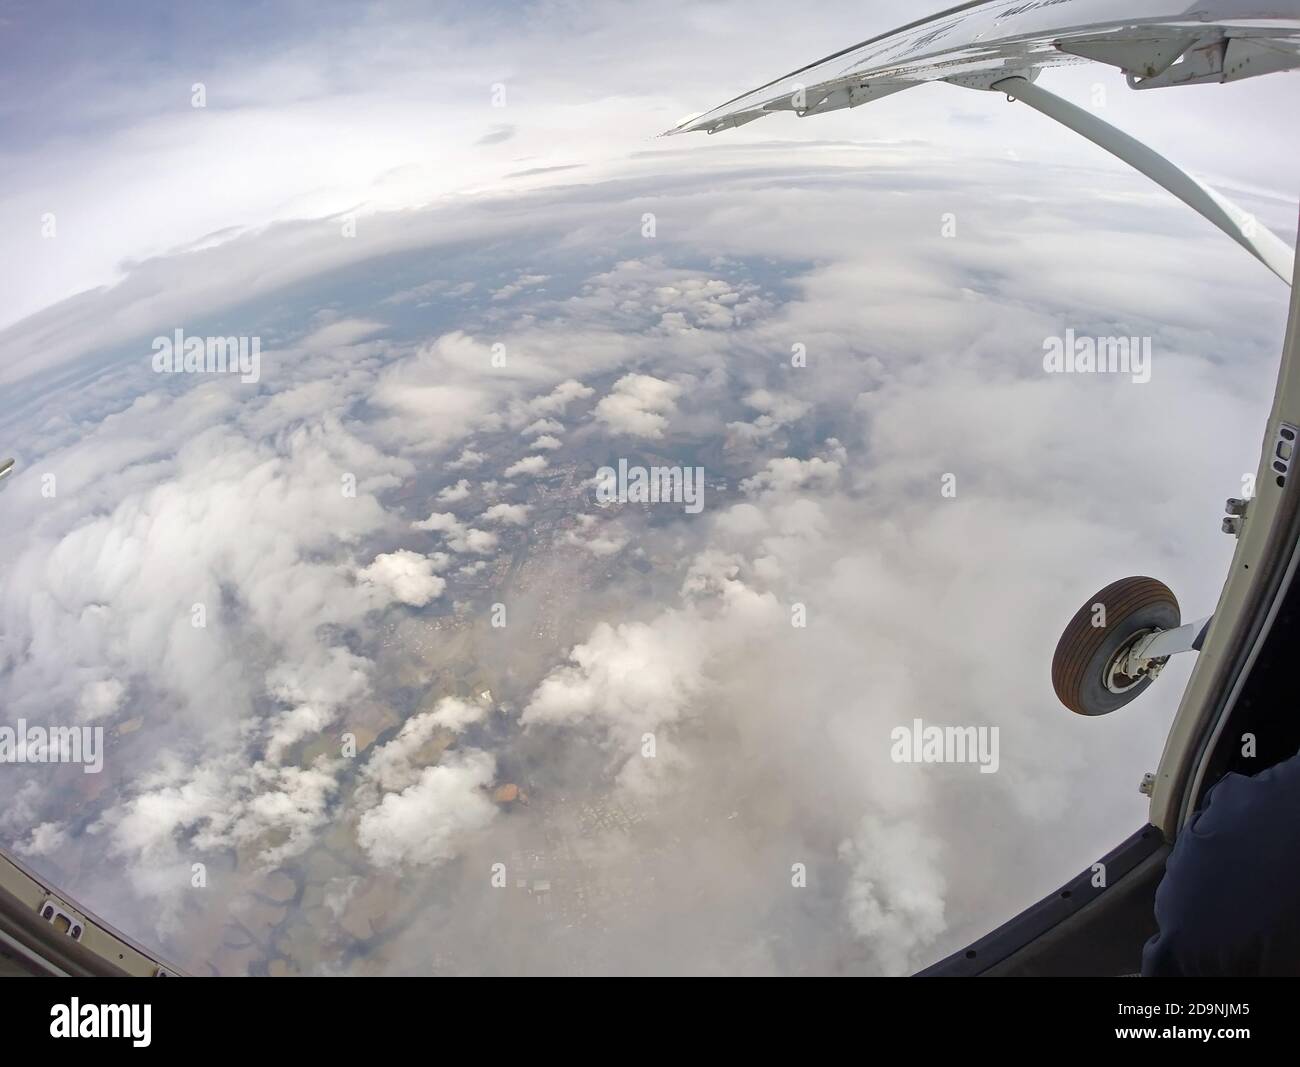 View from inside the parachute plane with the door open Stock Photo